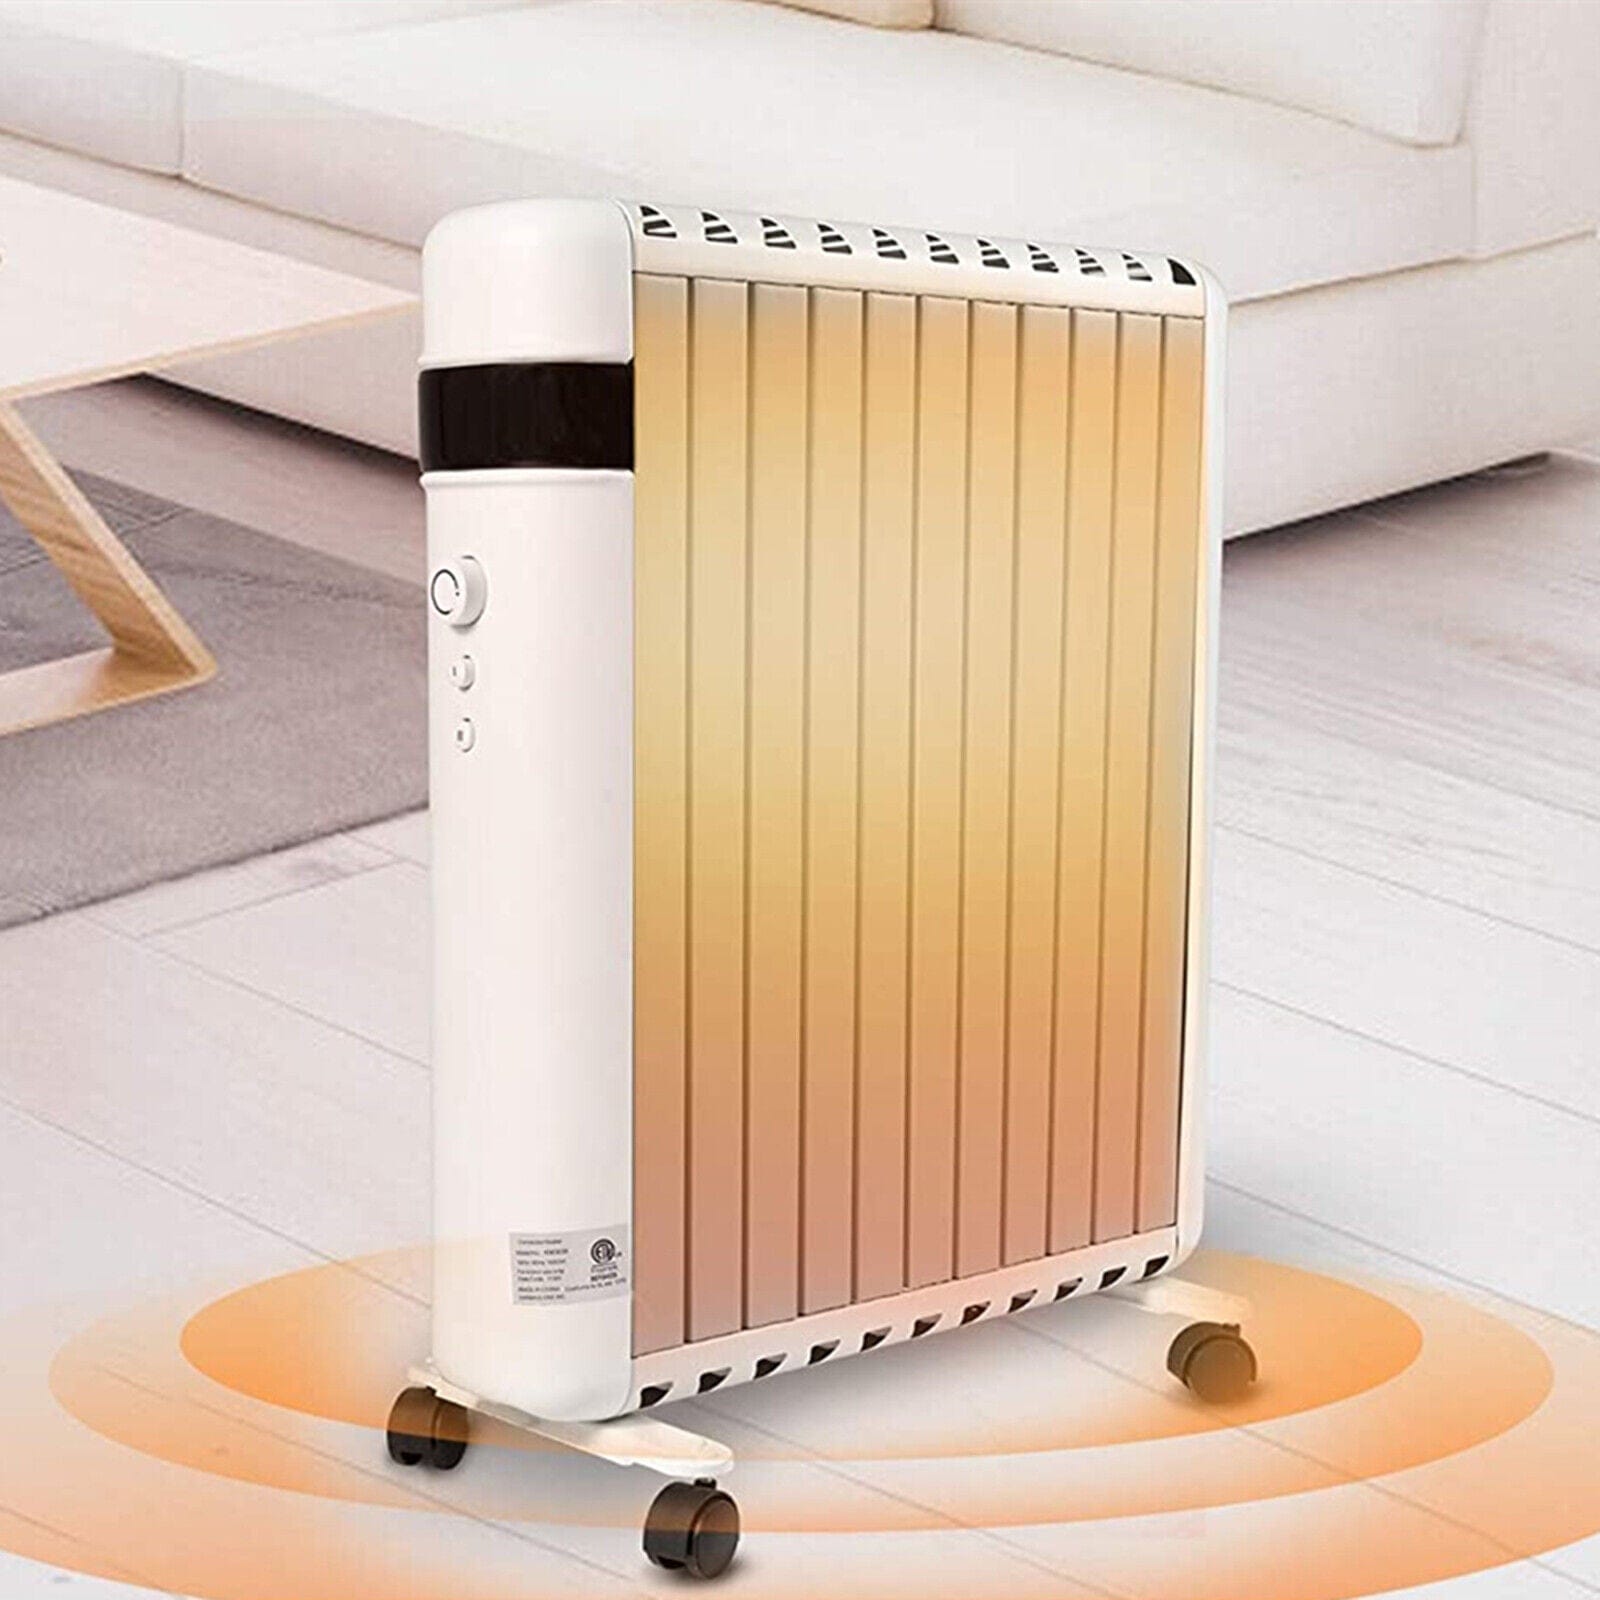 750W / 1500W Electric Space Heater Indoor Adjustable Thermostat Warmer w/ Wheels